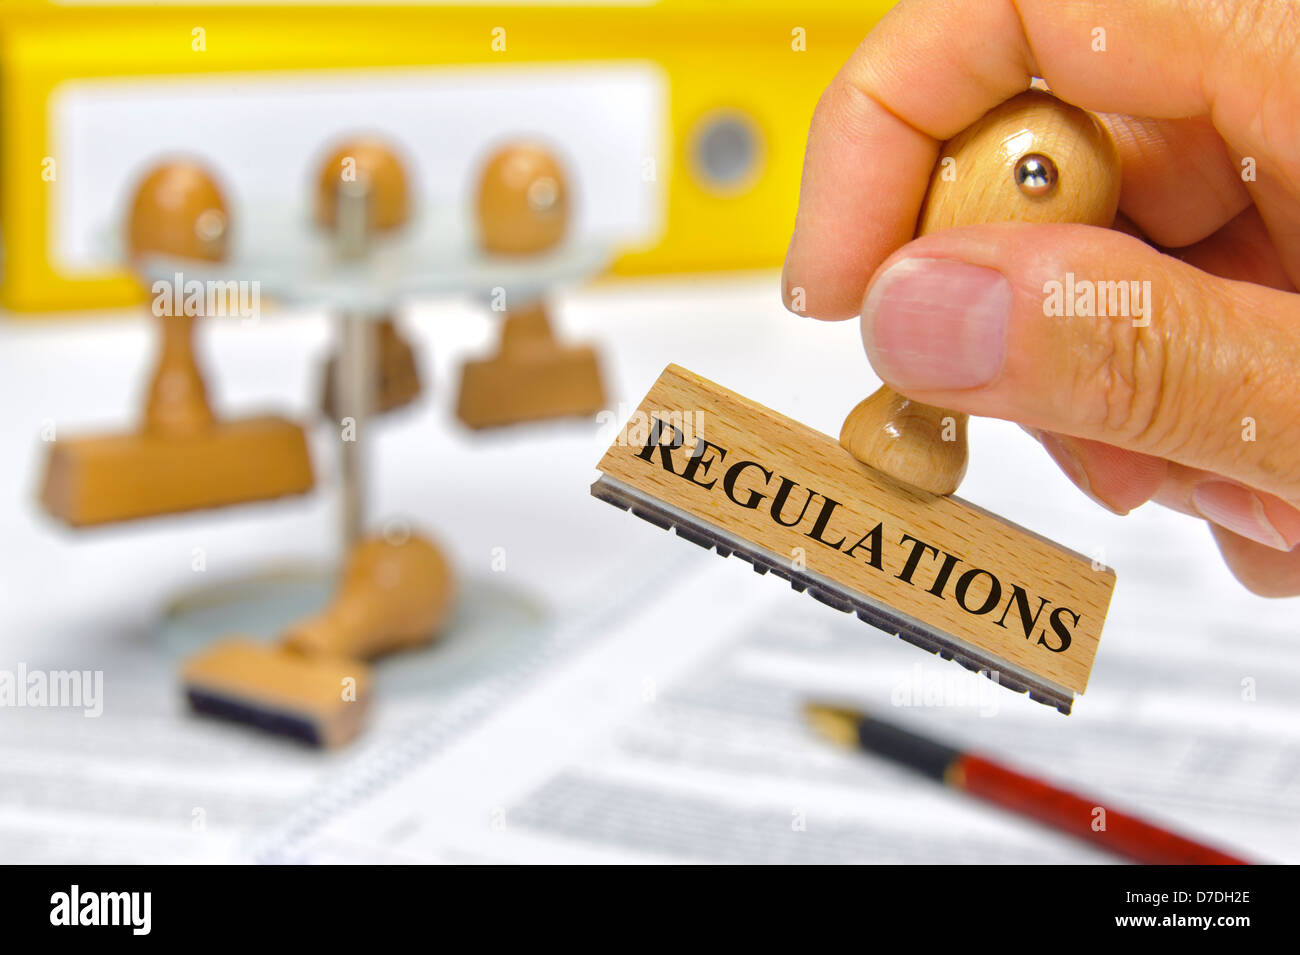 regulations marked on rubber stamp Stock Photo